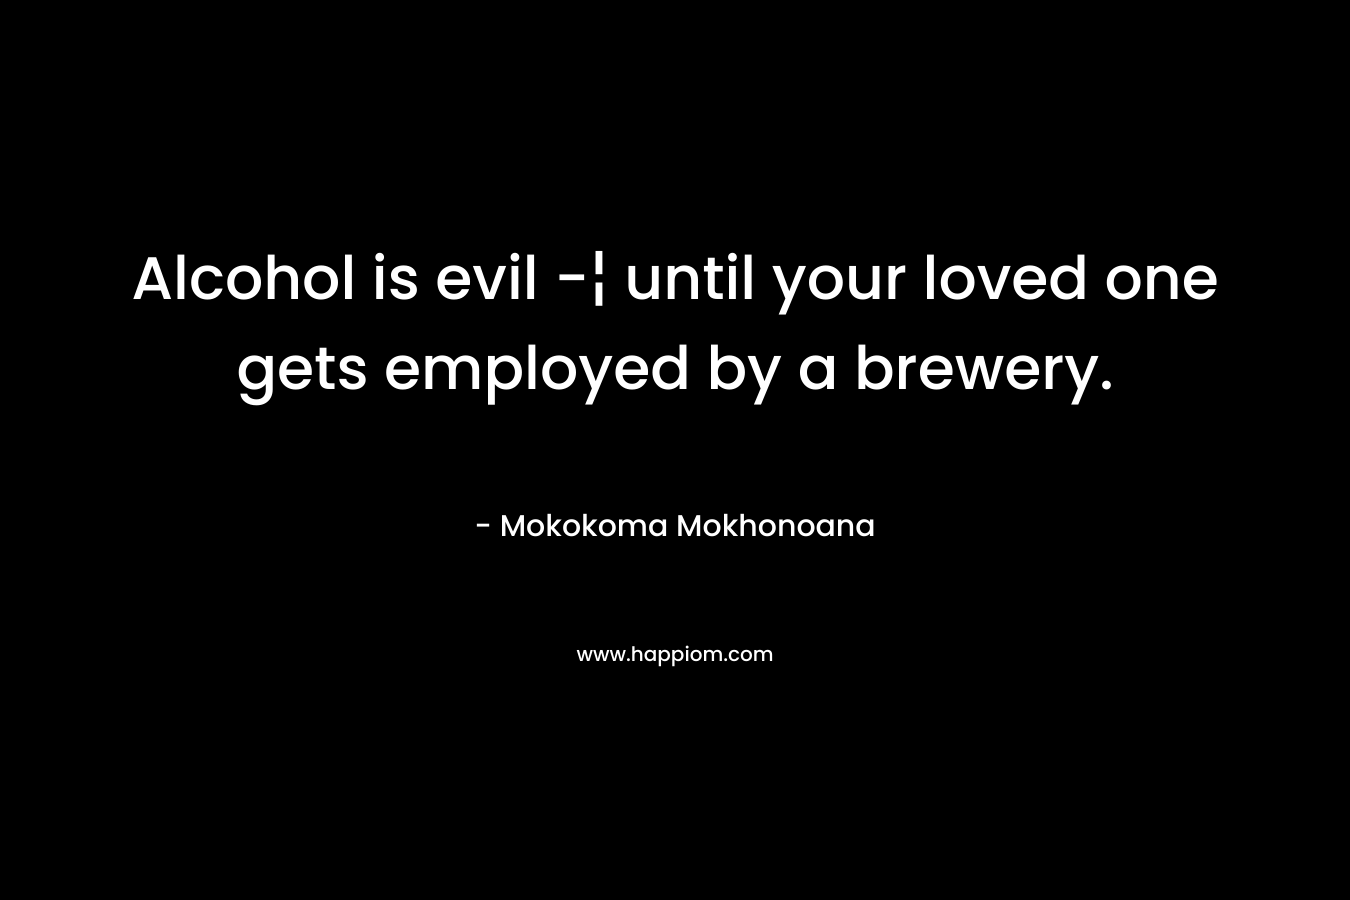 Alcohol is evil -¦ until your loved one gets employed by a brewery. – Mokokoma Mokhonoana